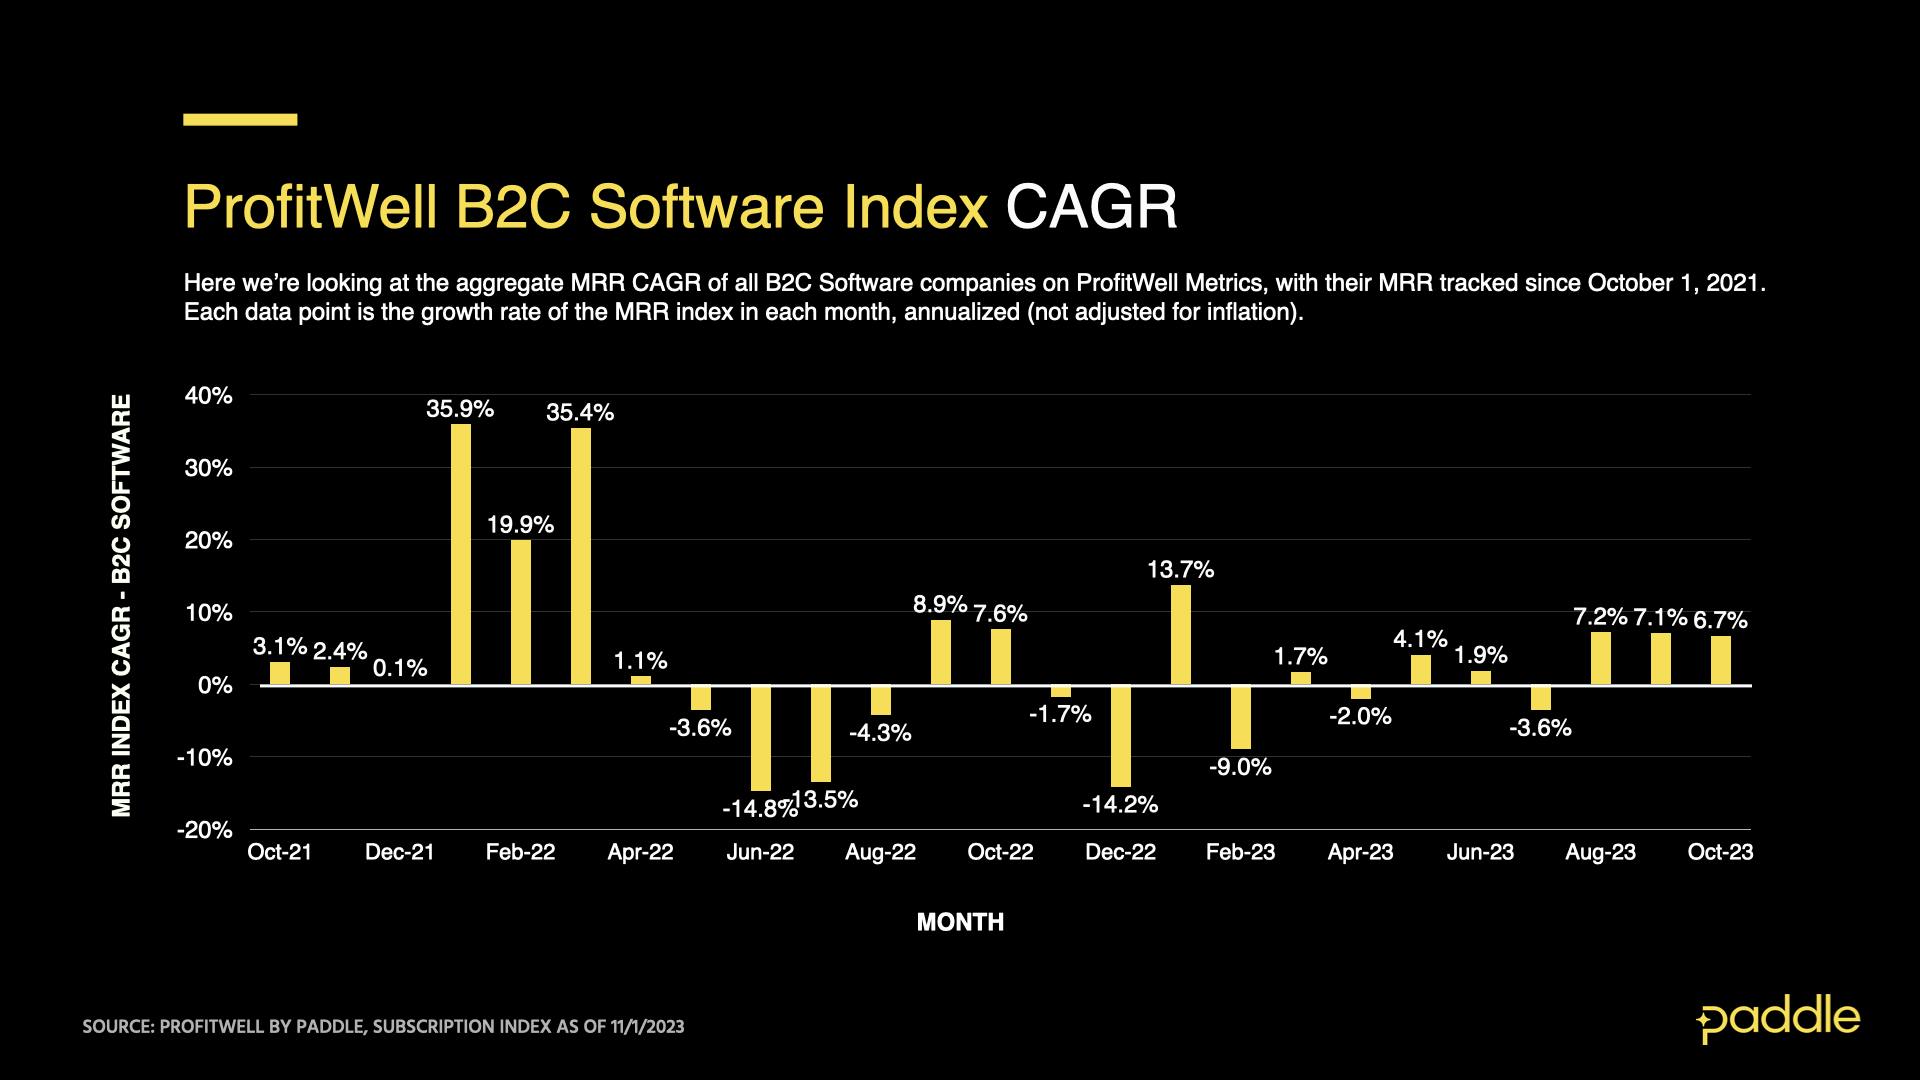 ProfitWell B2C Software Index as of November 1, 2023 - Compound Annual Growth Rate in MRR, Monthly